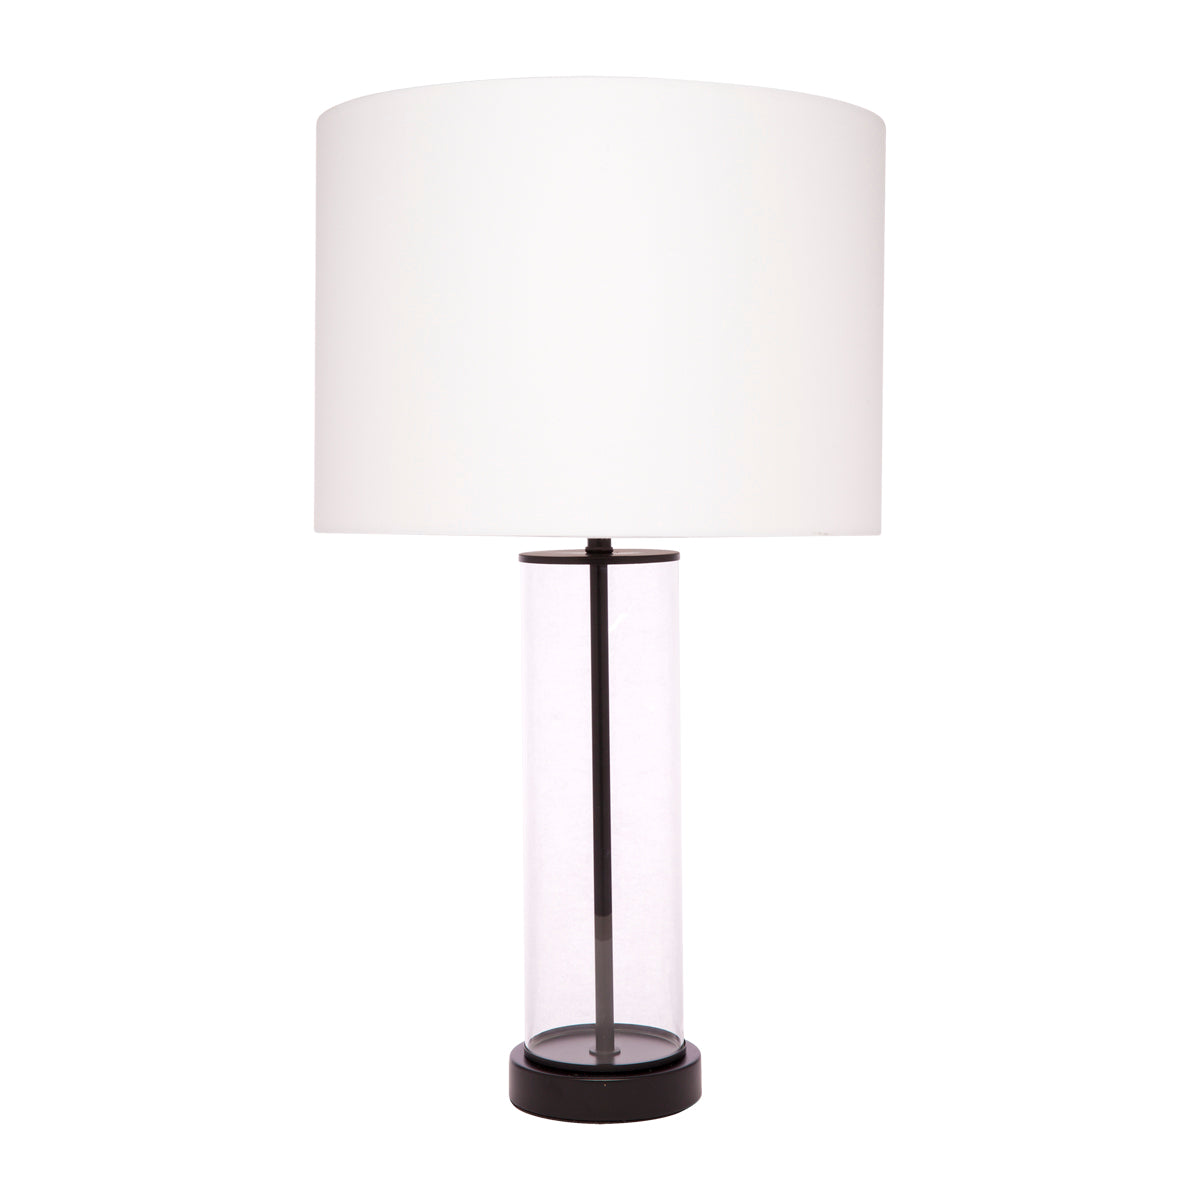 East Side Table Lamp with White Shade - Black - Notbrand